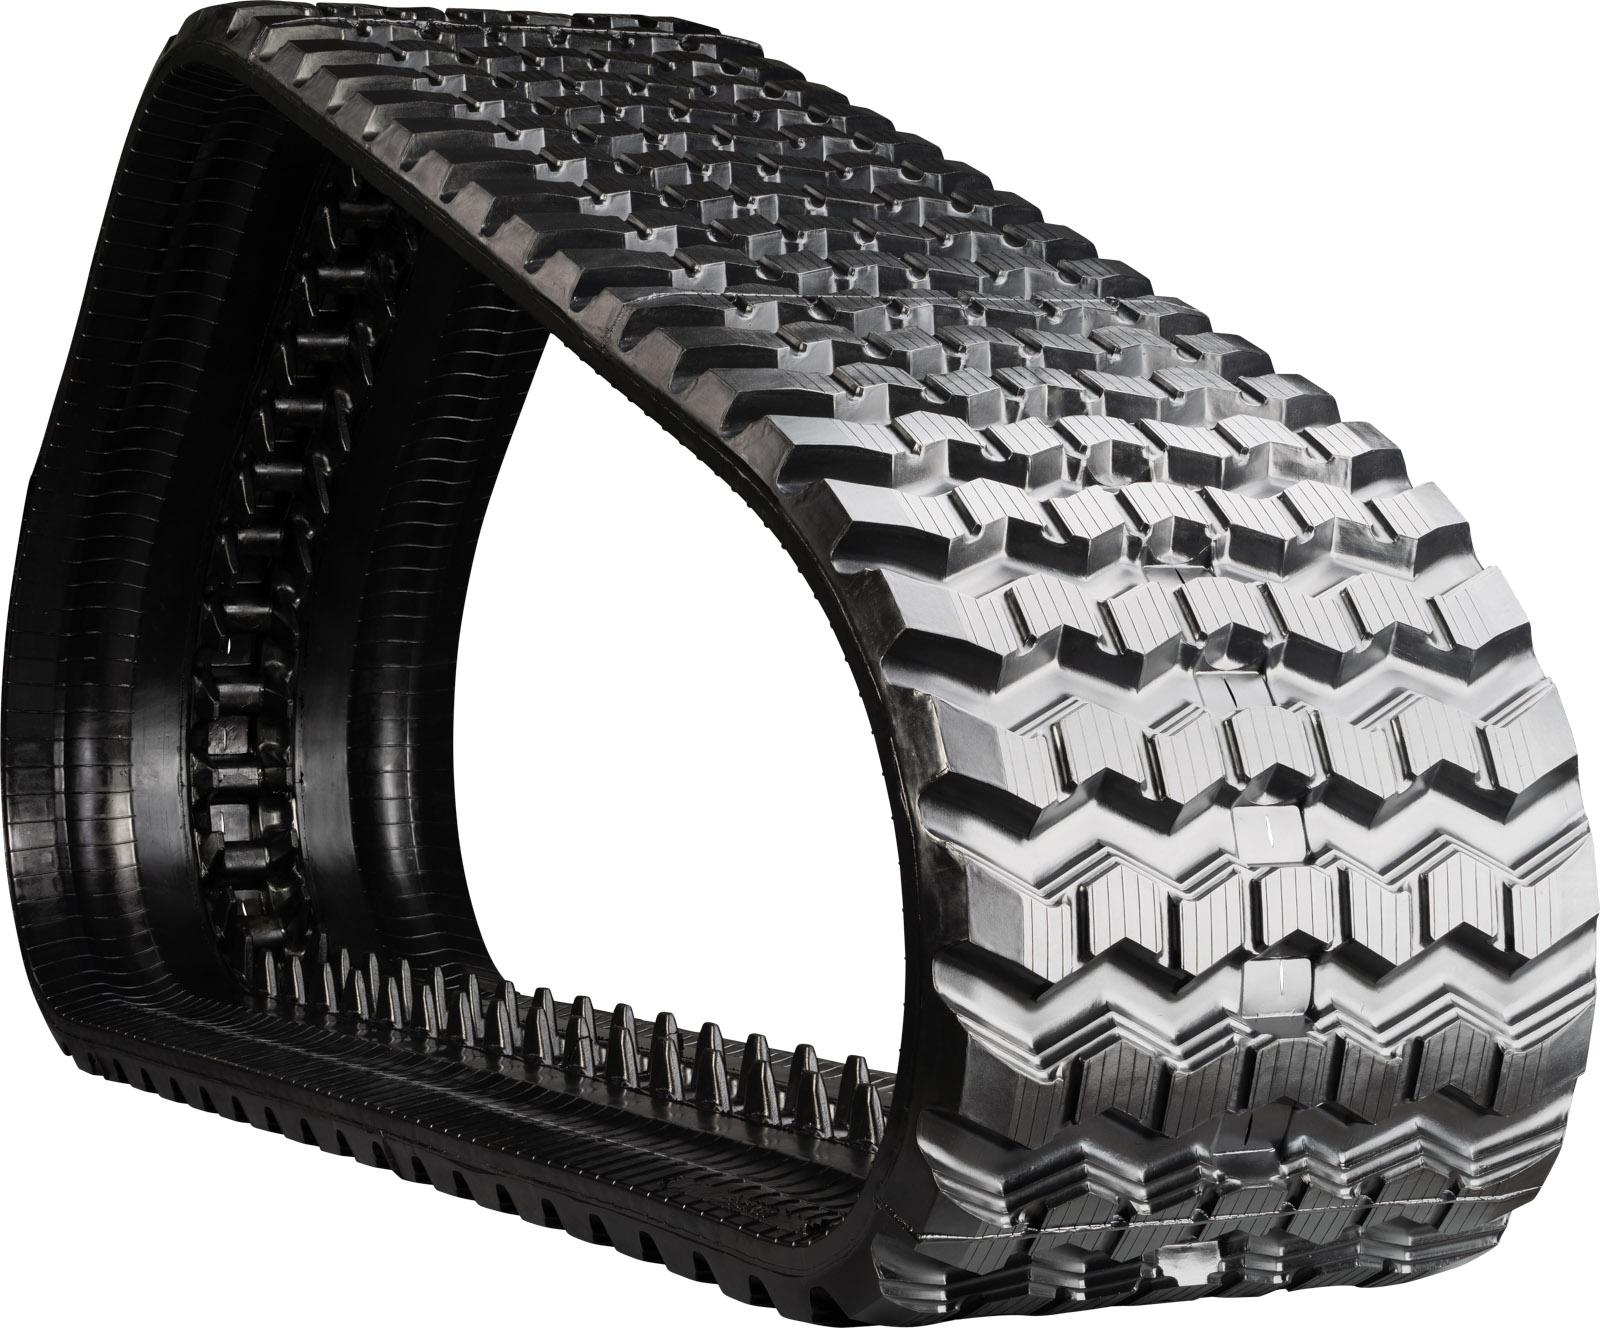 set of 2 18" camso heavy duty sawtooth pattern rubber track (450x86bx58)